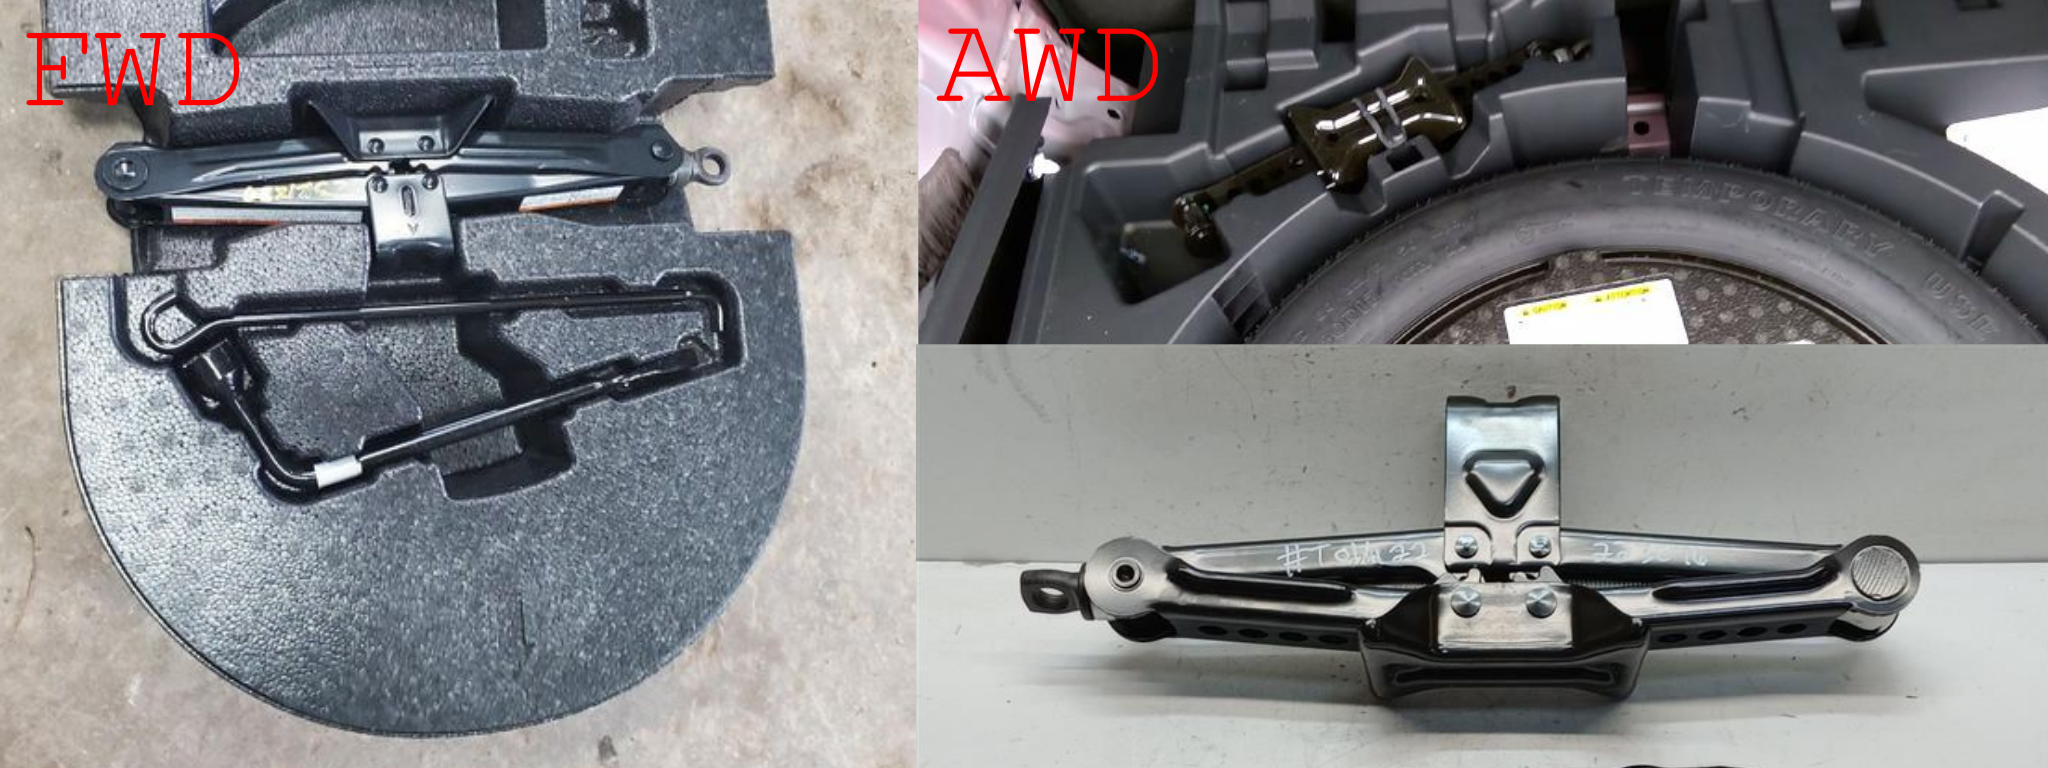 toyota corolla cross jack assembly fwd awd comparison